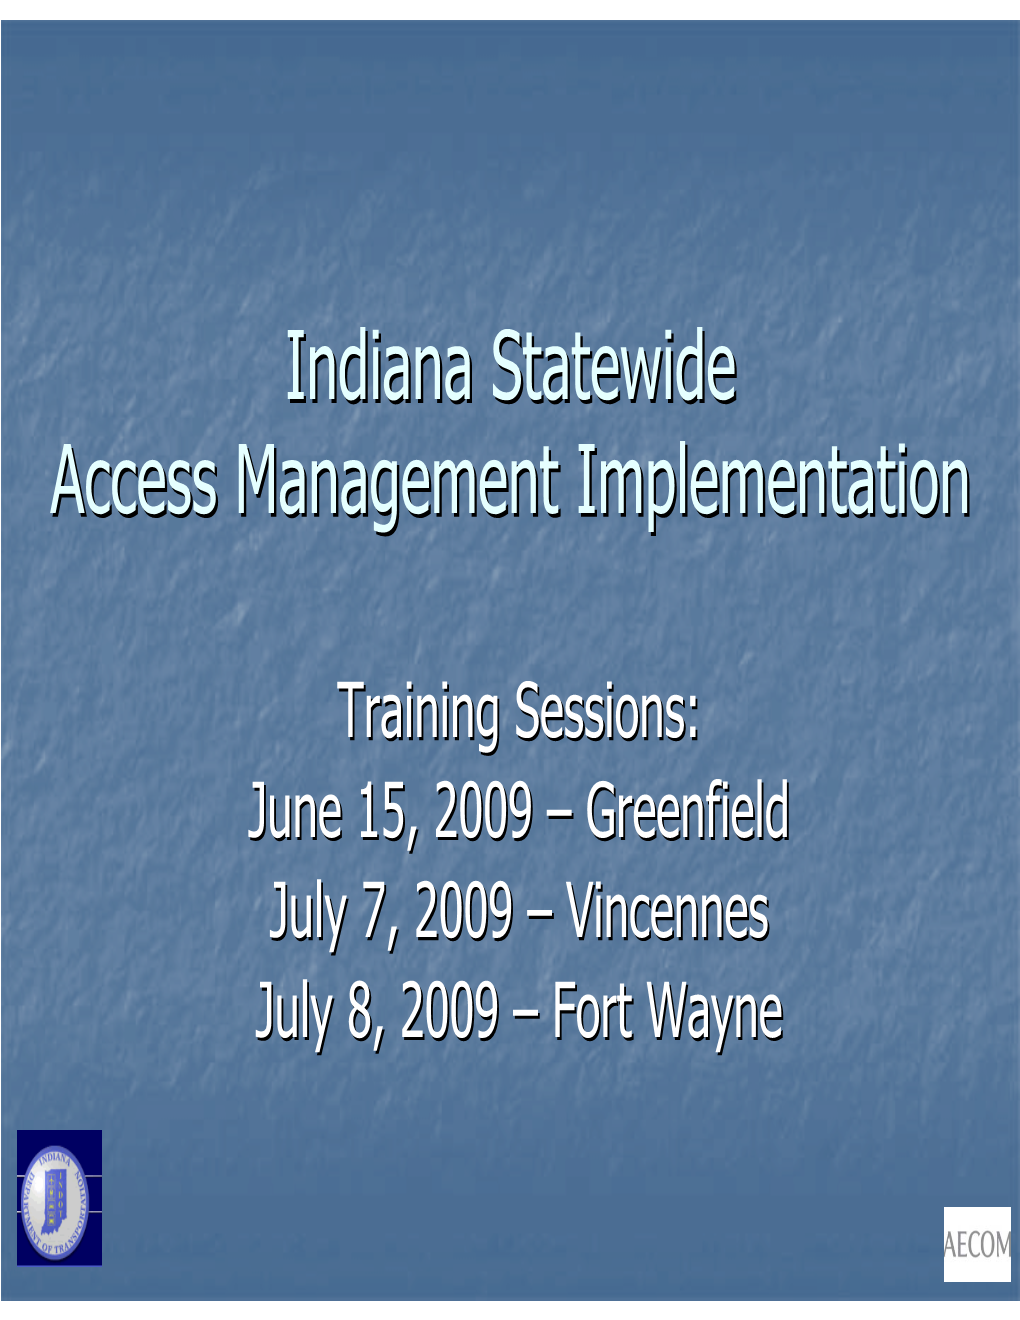 Indiana Statewide Access Management Implementation